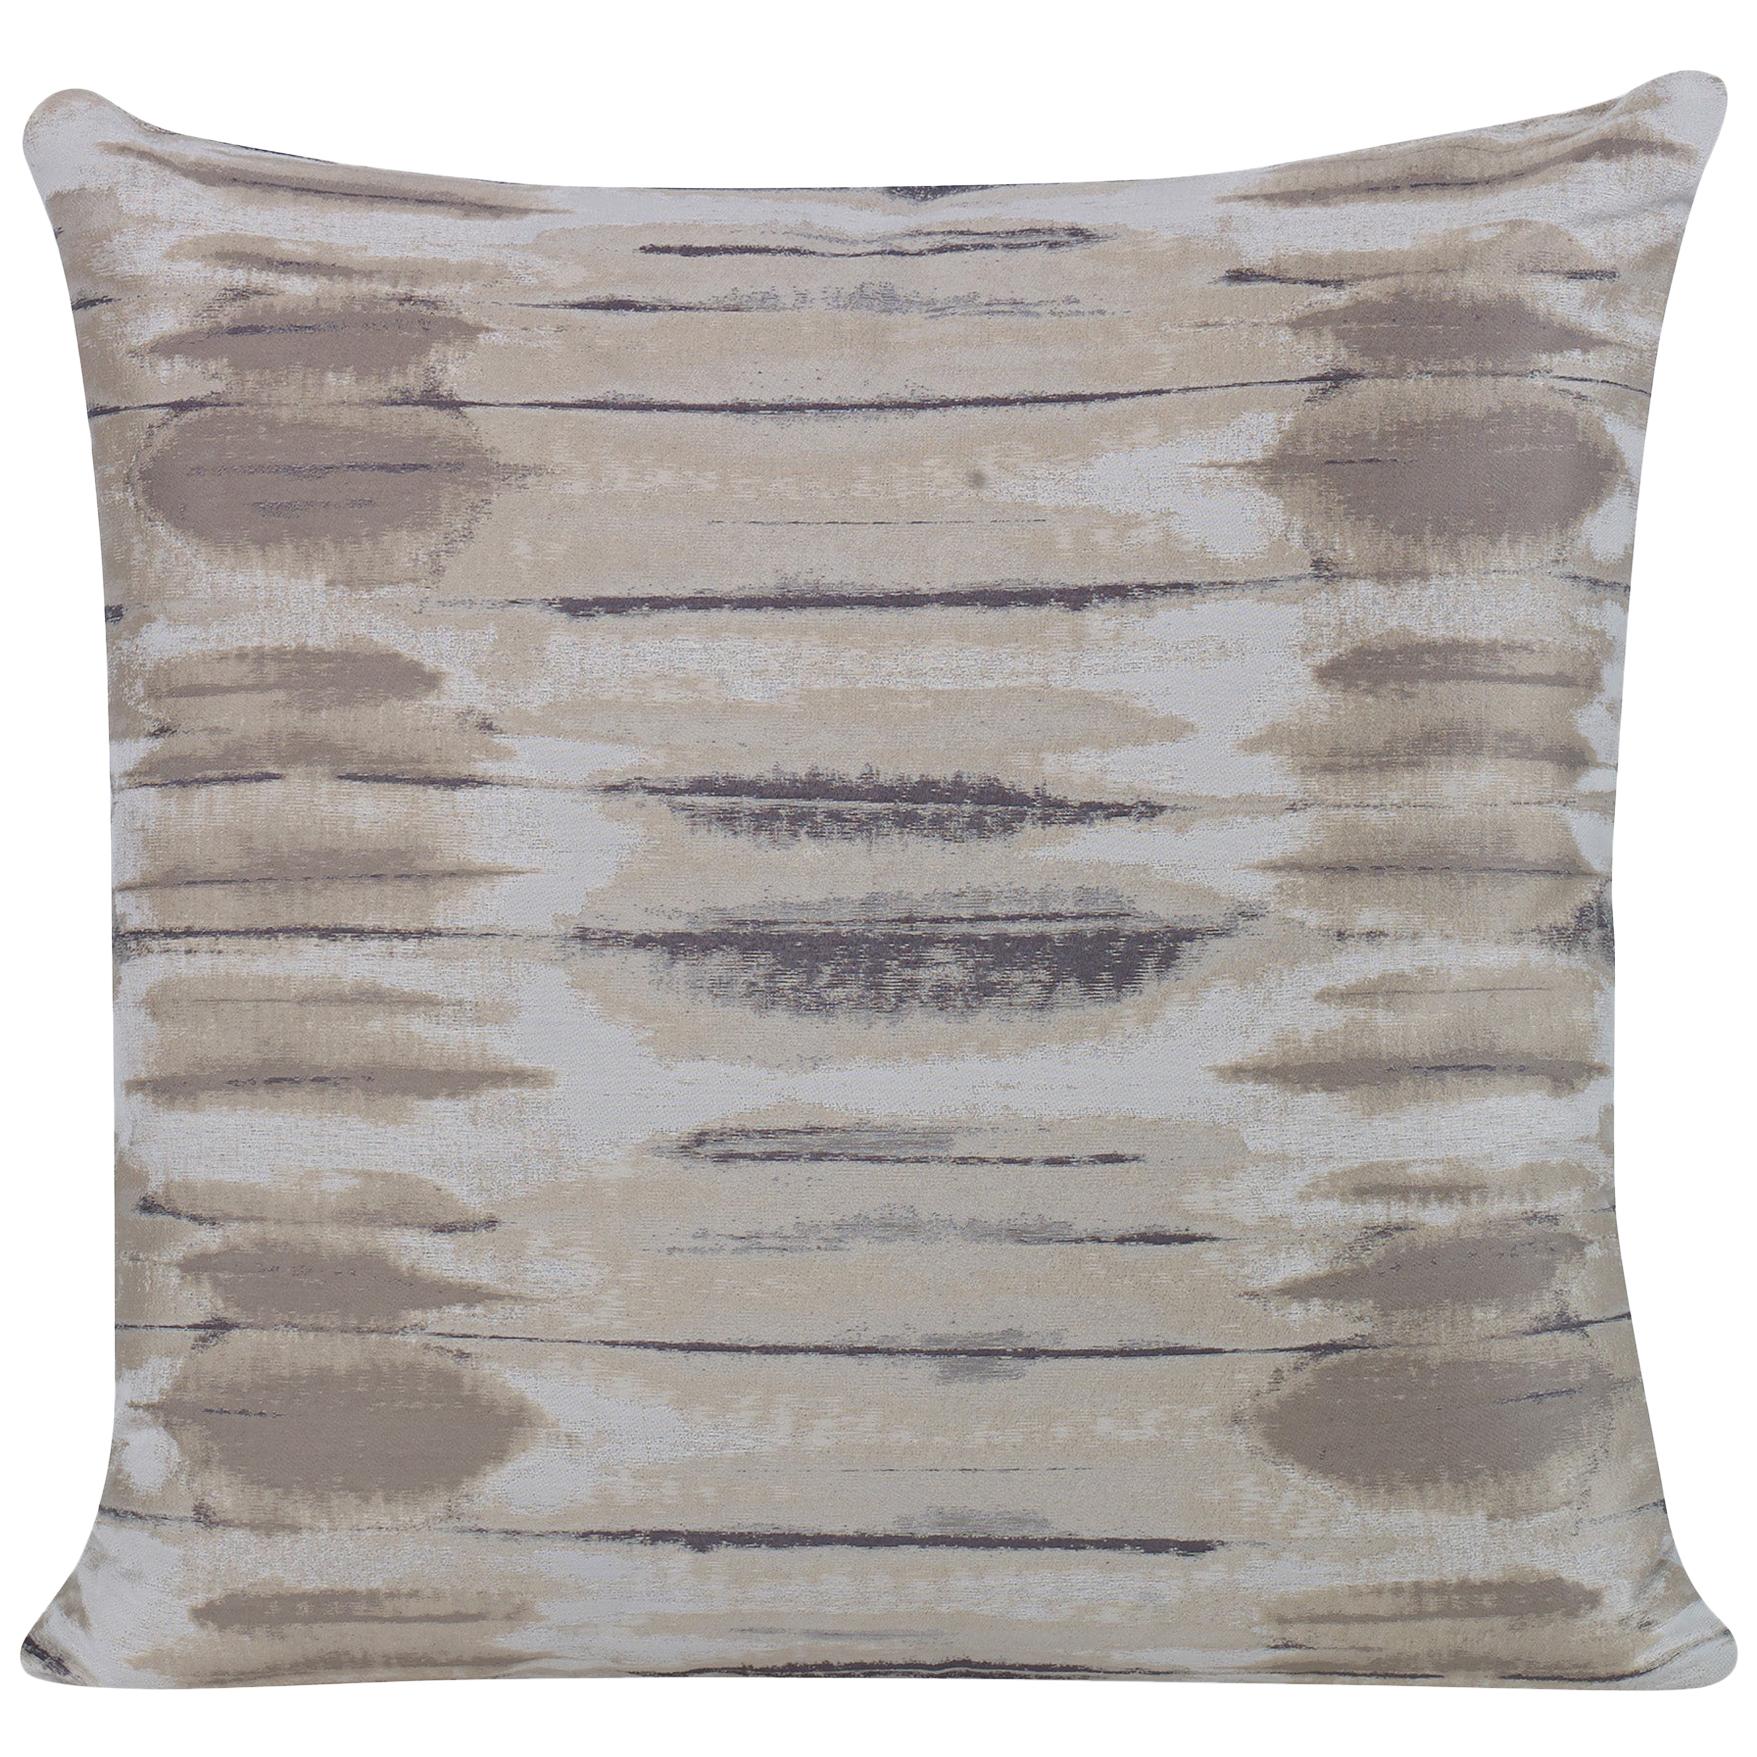 Tantino Pillow in Gray and Tan by Curatedkravet